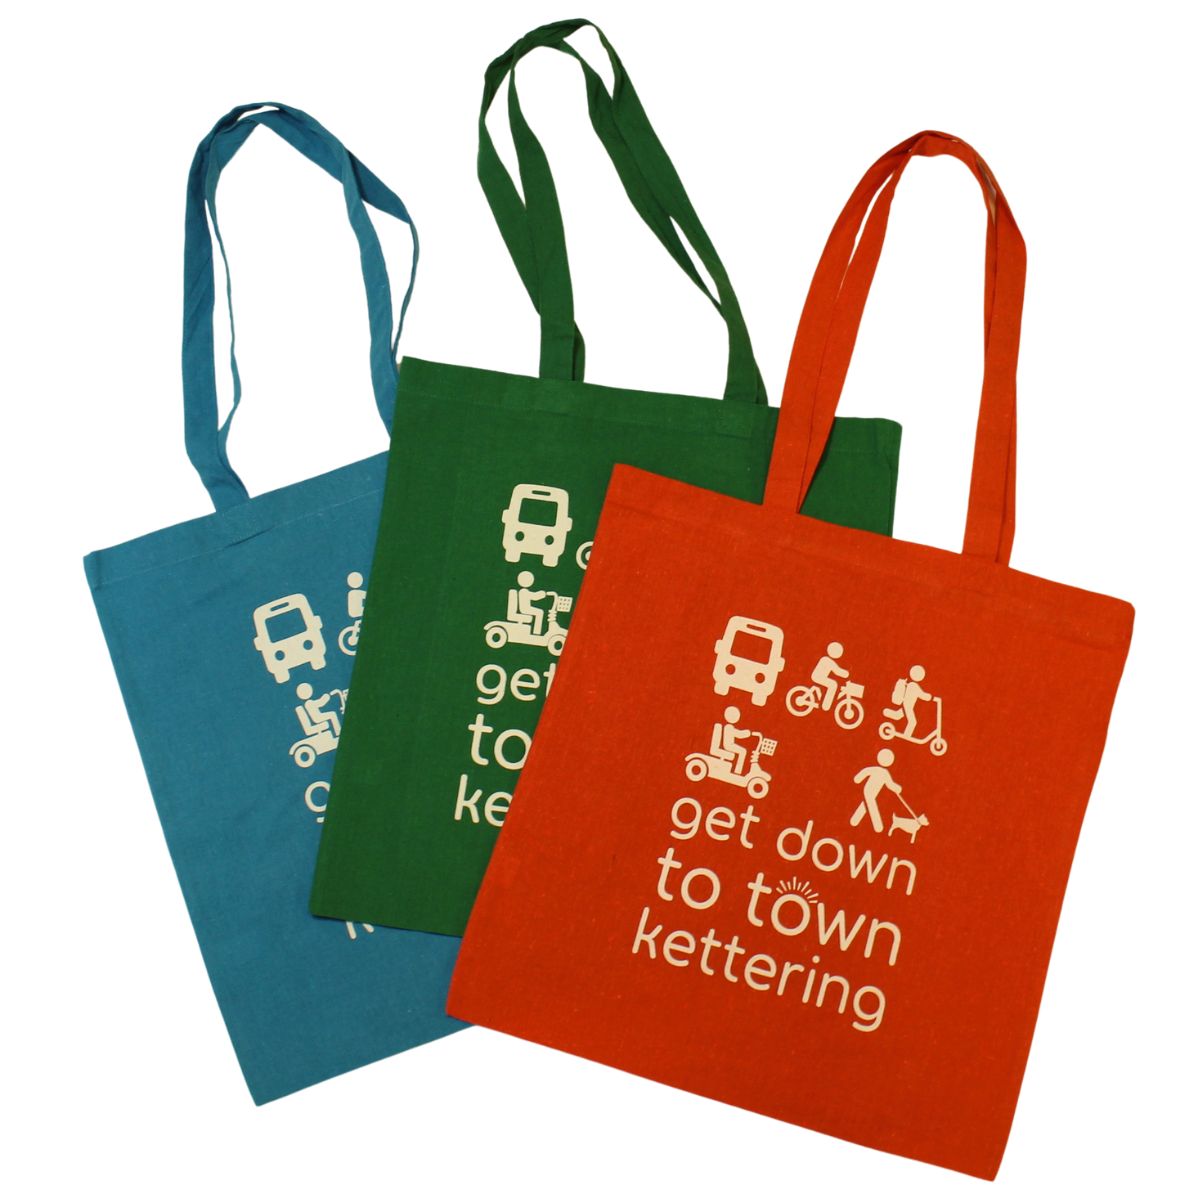 Three Recycled Cotton Shopper Bags splayed out in orange, green and blue